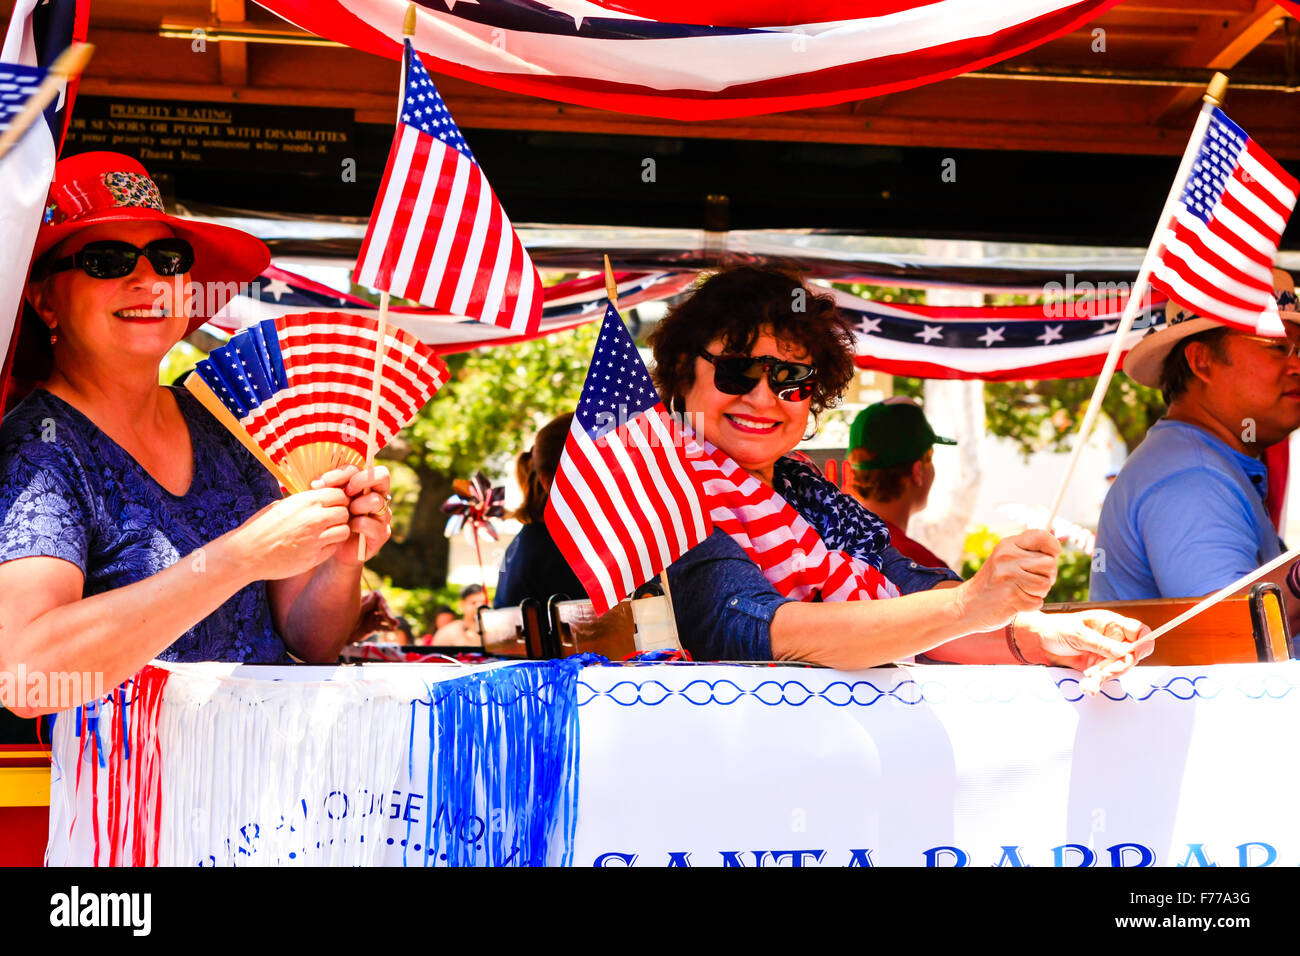 Daughters of the Revolution wave flags at the July 4th celebration